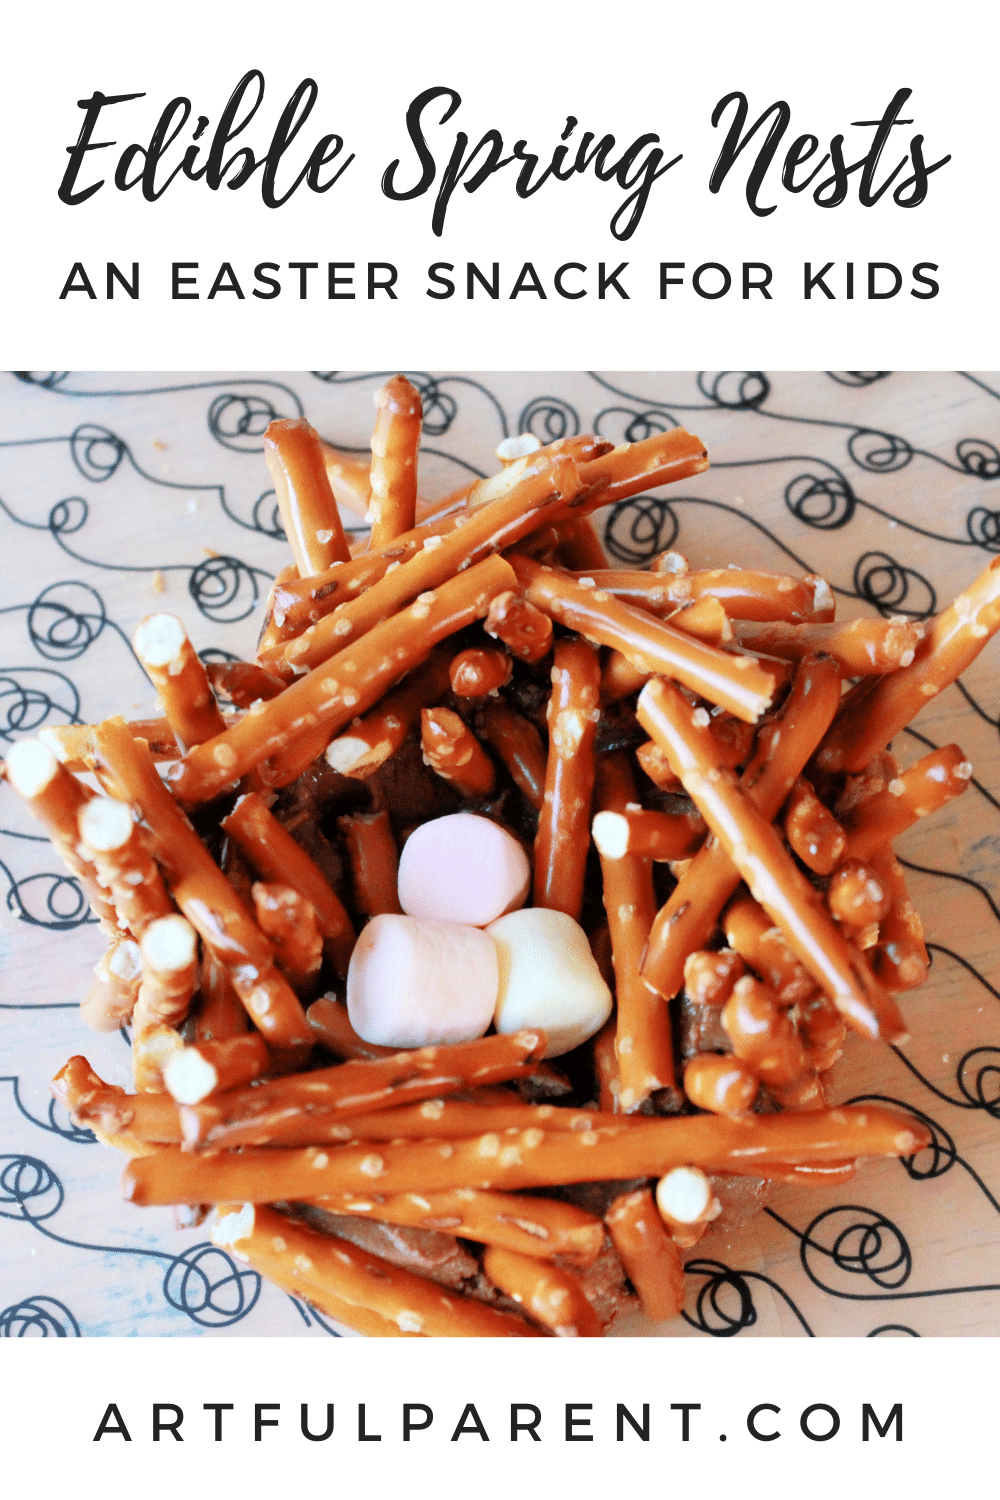 How to Make a Spring Nest Easter Snack